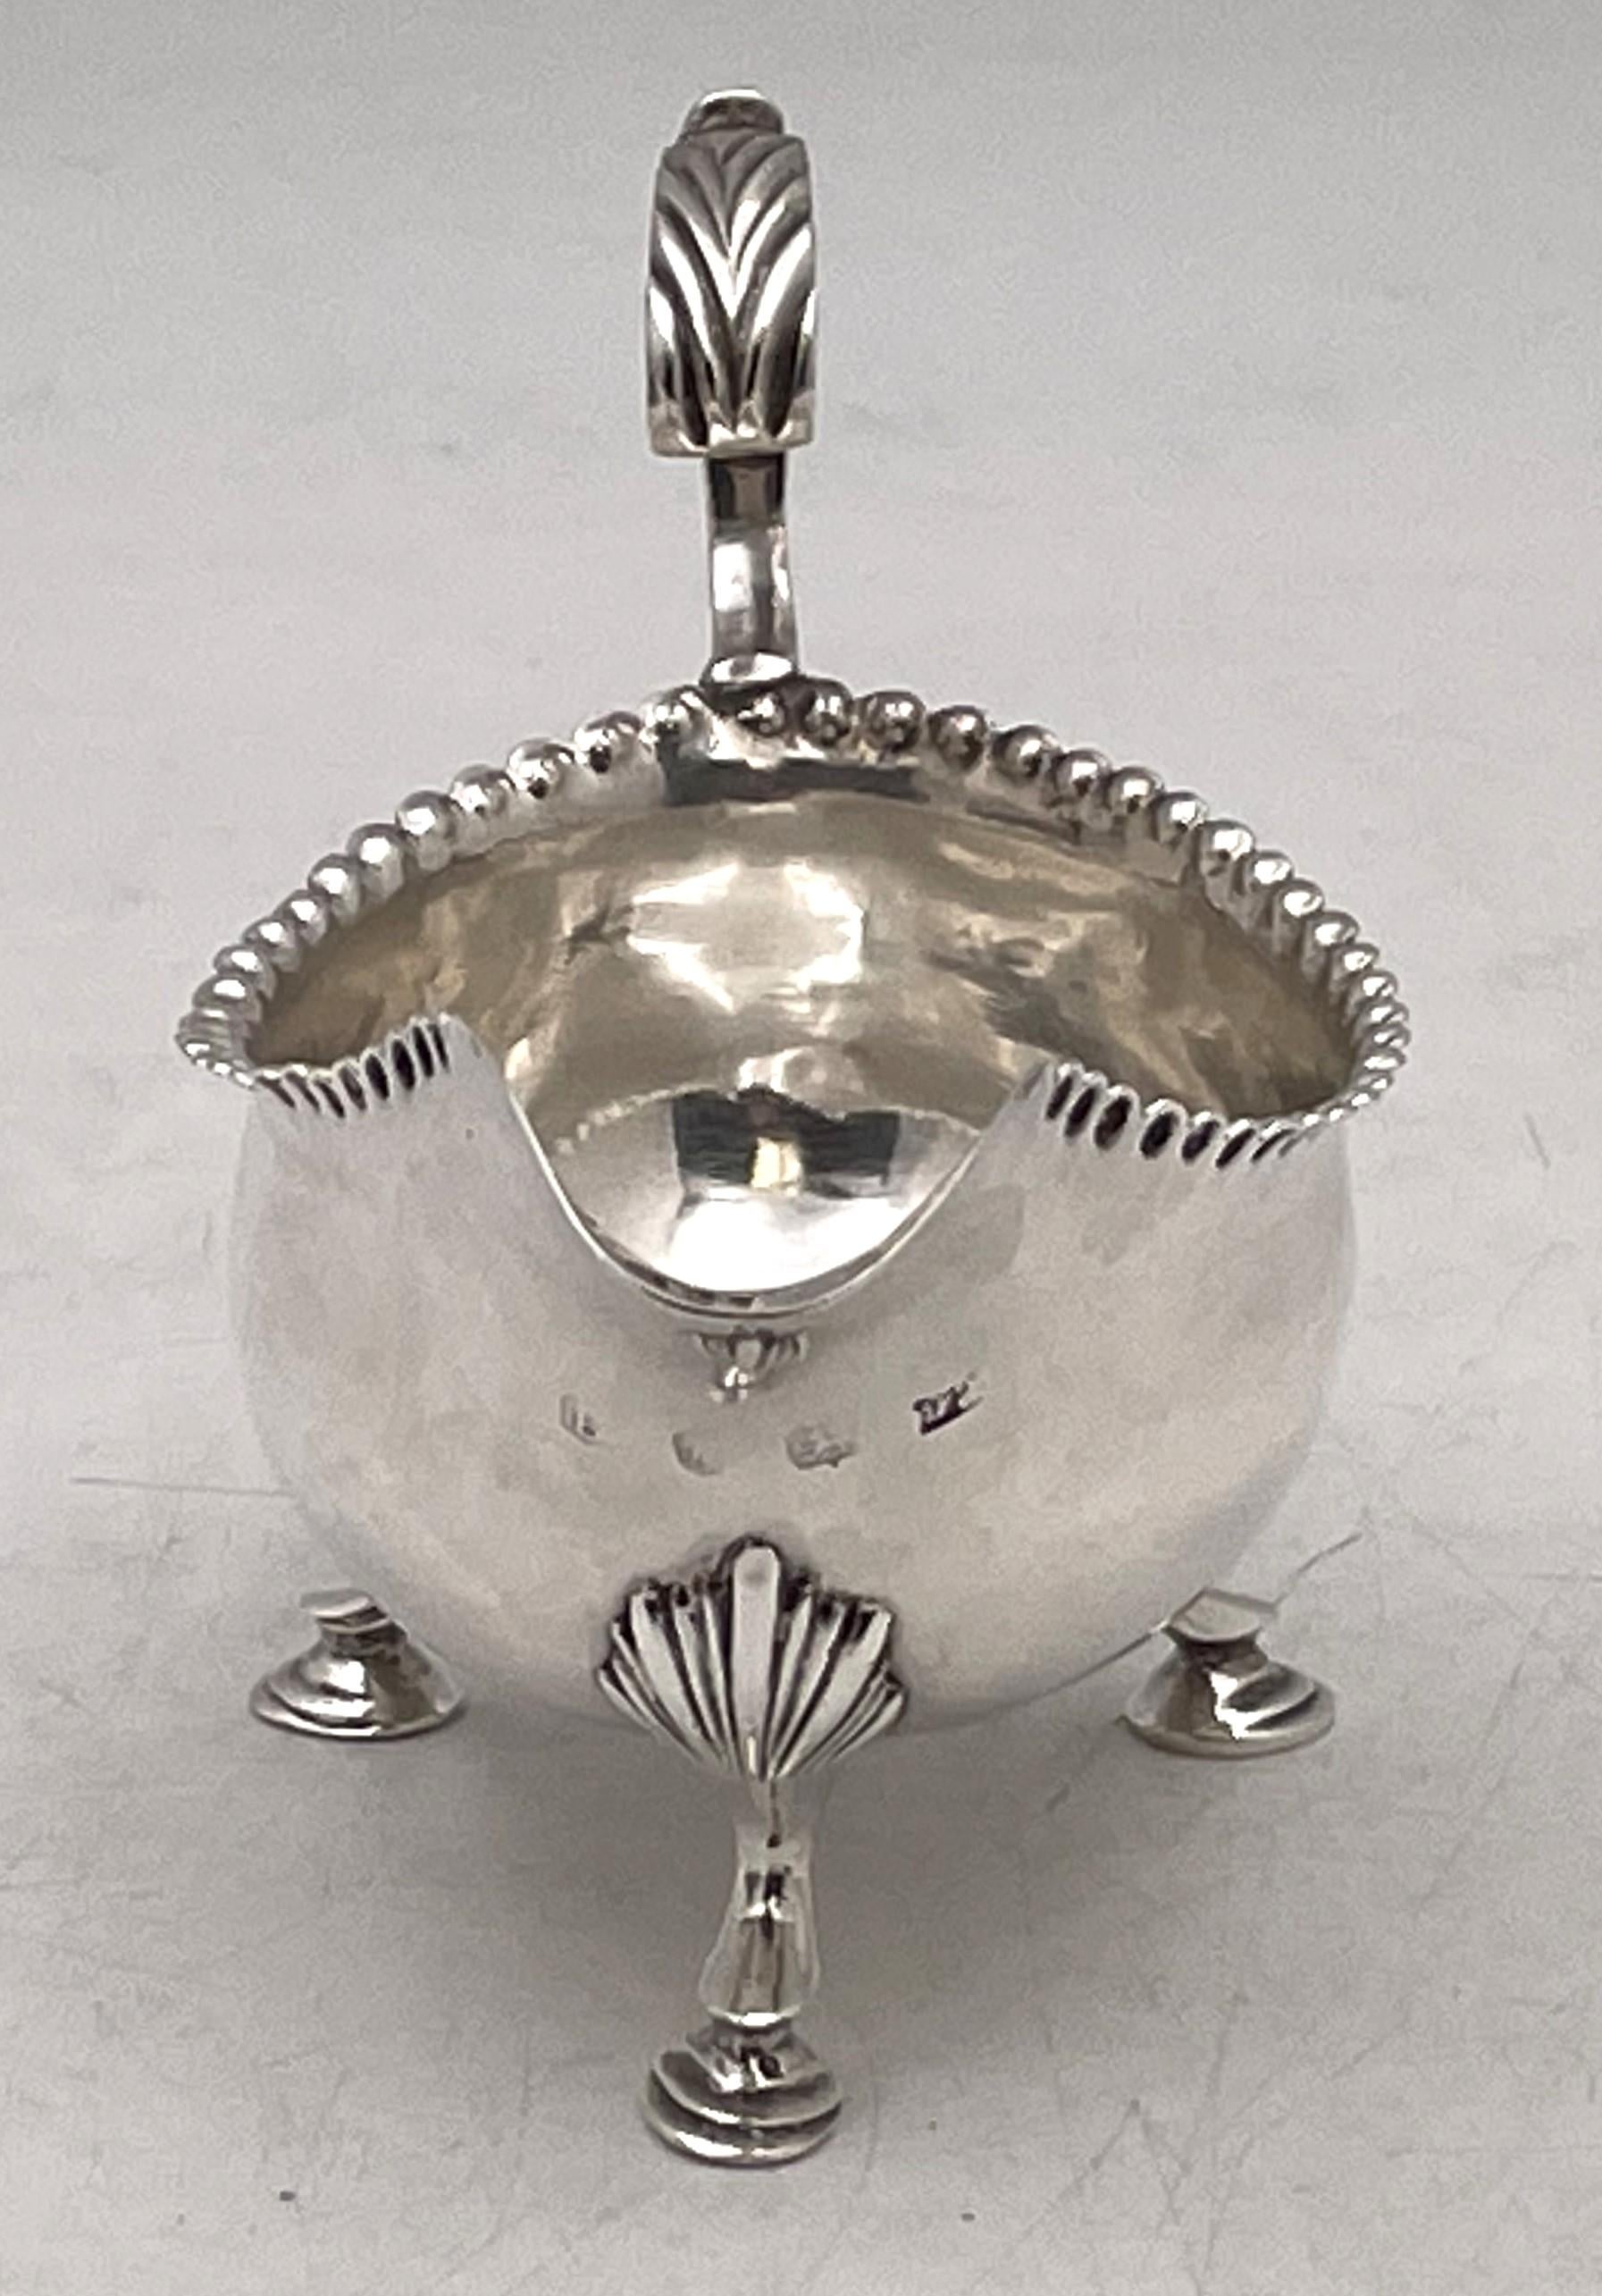 Rare Hester Bateman sterling silver sauce boat from 1782 in an elegant Georgian style. It measures 5 1/2'' from handle to spout by 3'' in height and weighs 3.1 troy ounces.  

The Bateman family are the most famous silversmiths of the Georgian era.